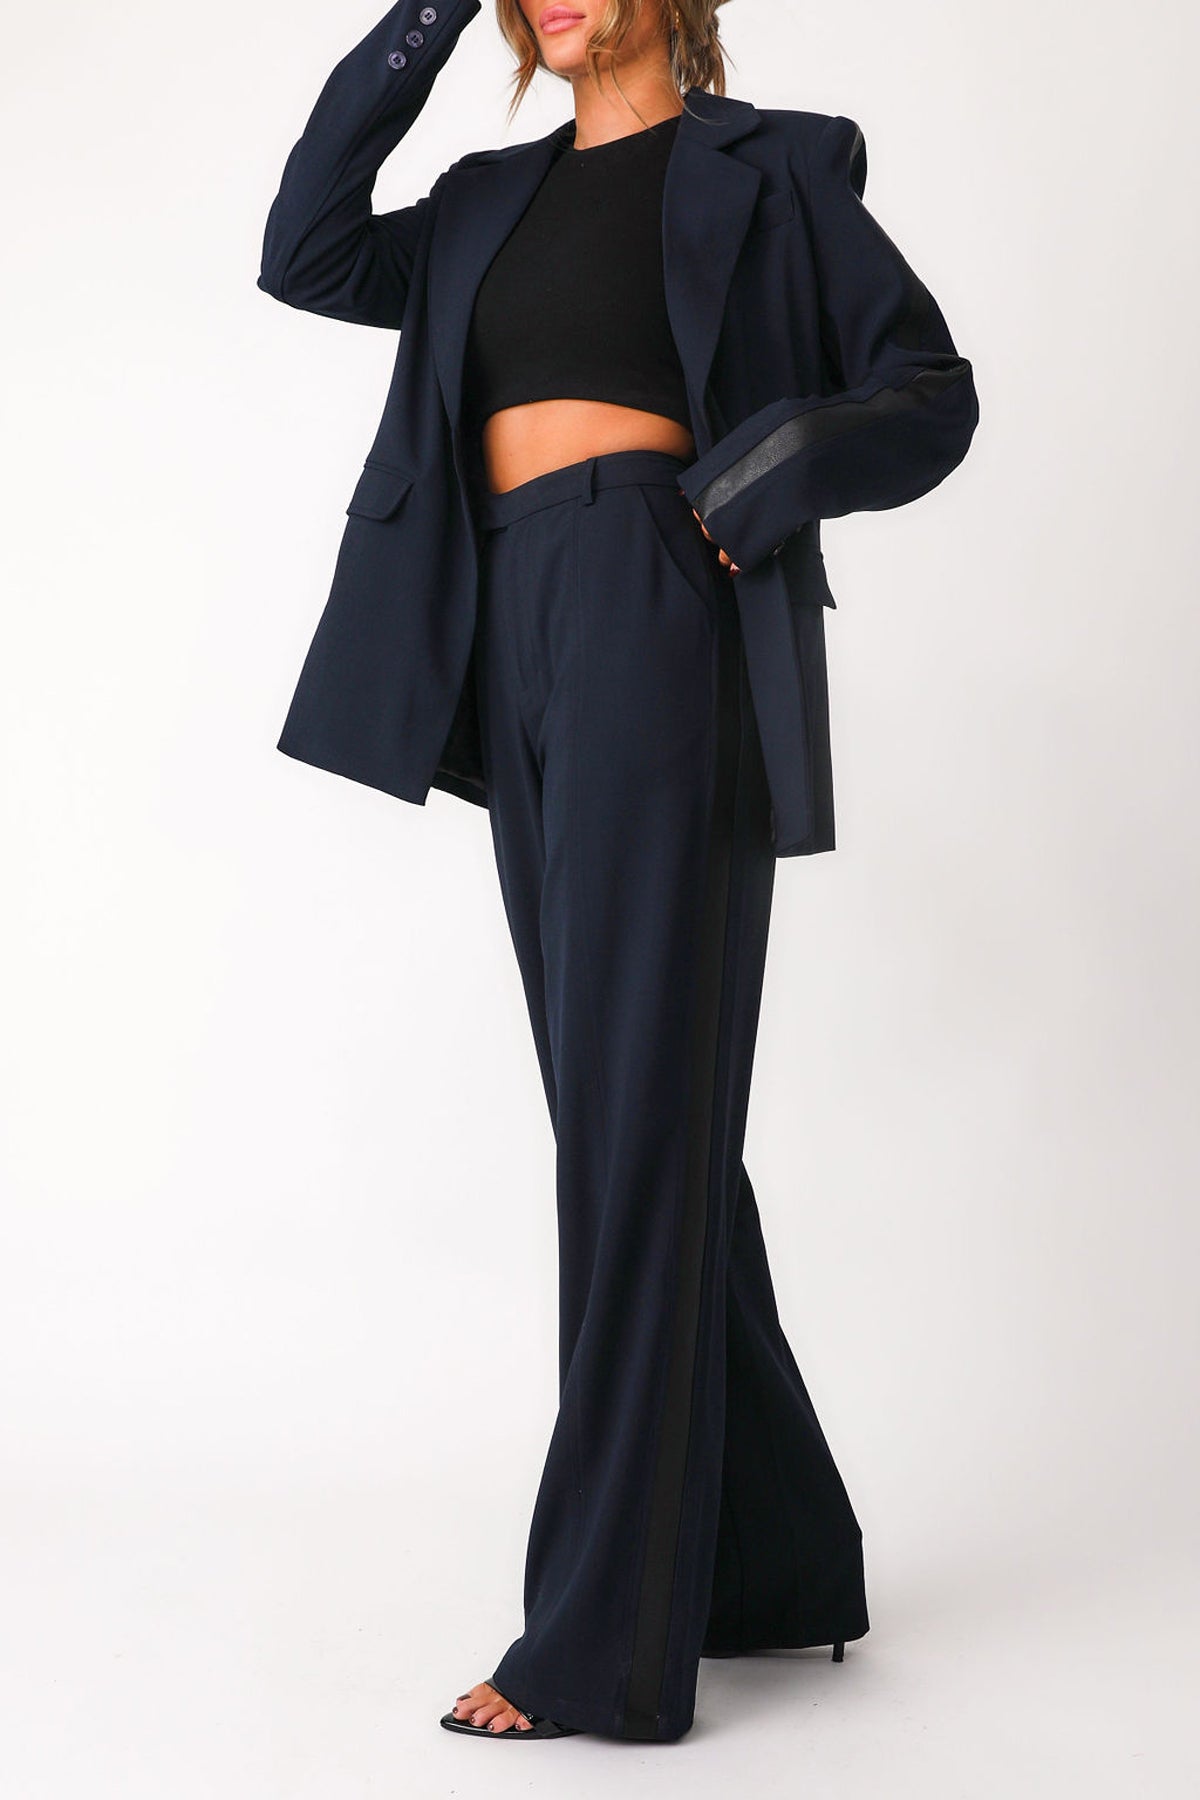 Full body front view of model model wearing 'Bianca' navy trousers paired with matching 'Bianca' navy blazer worn open over black basics bra tank.